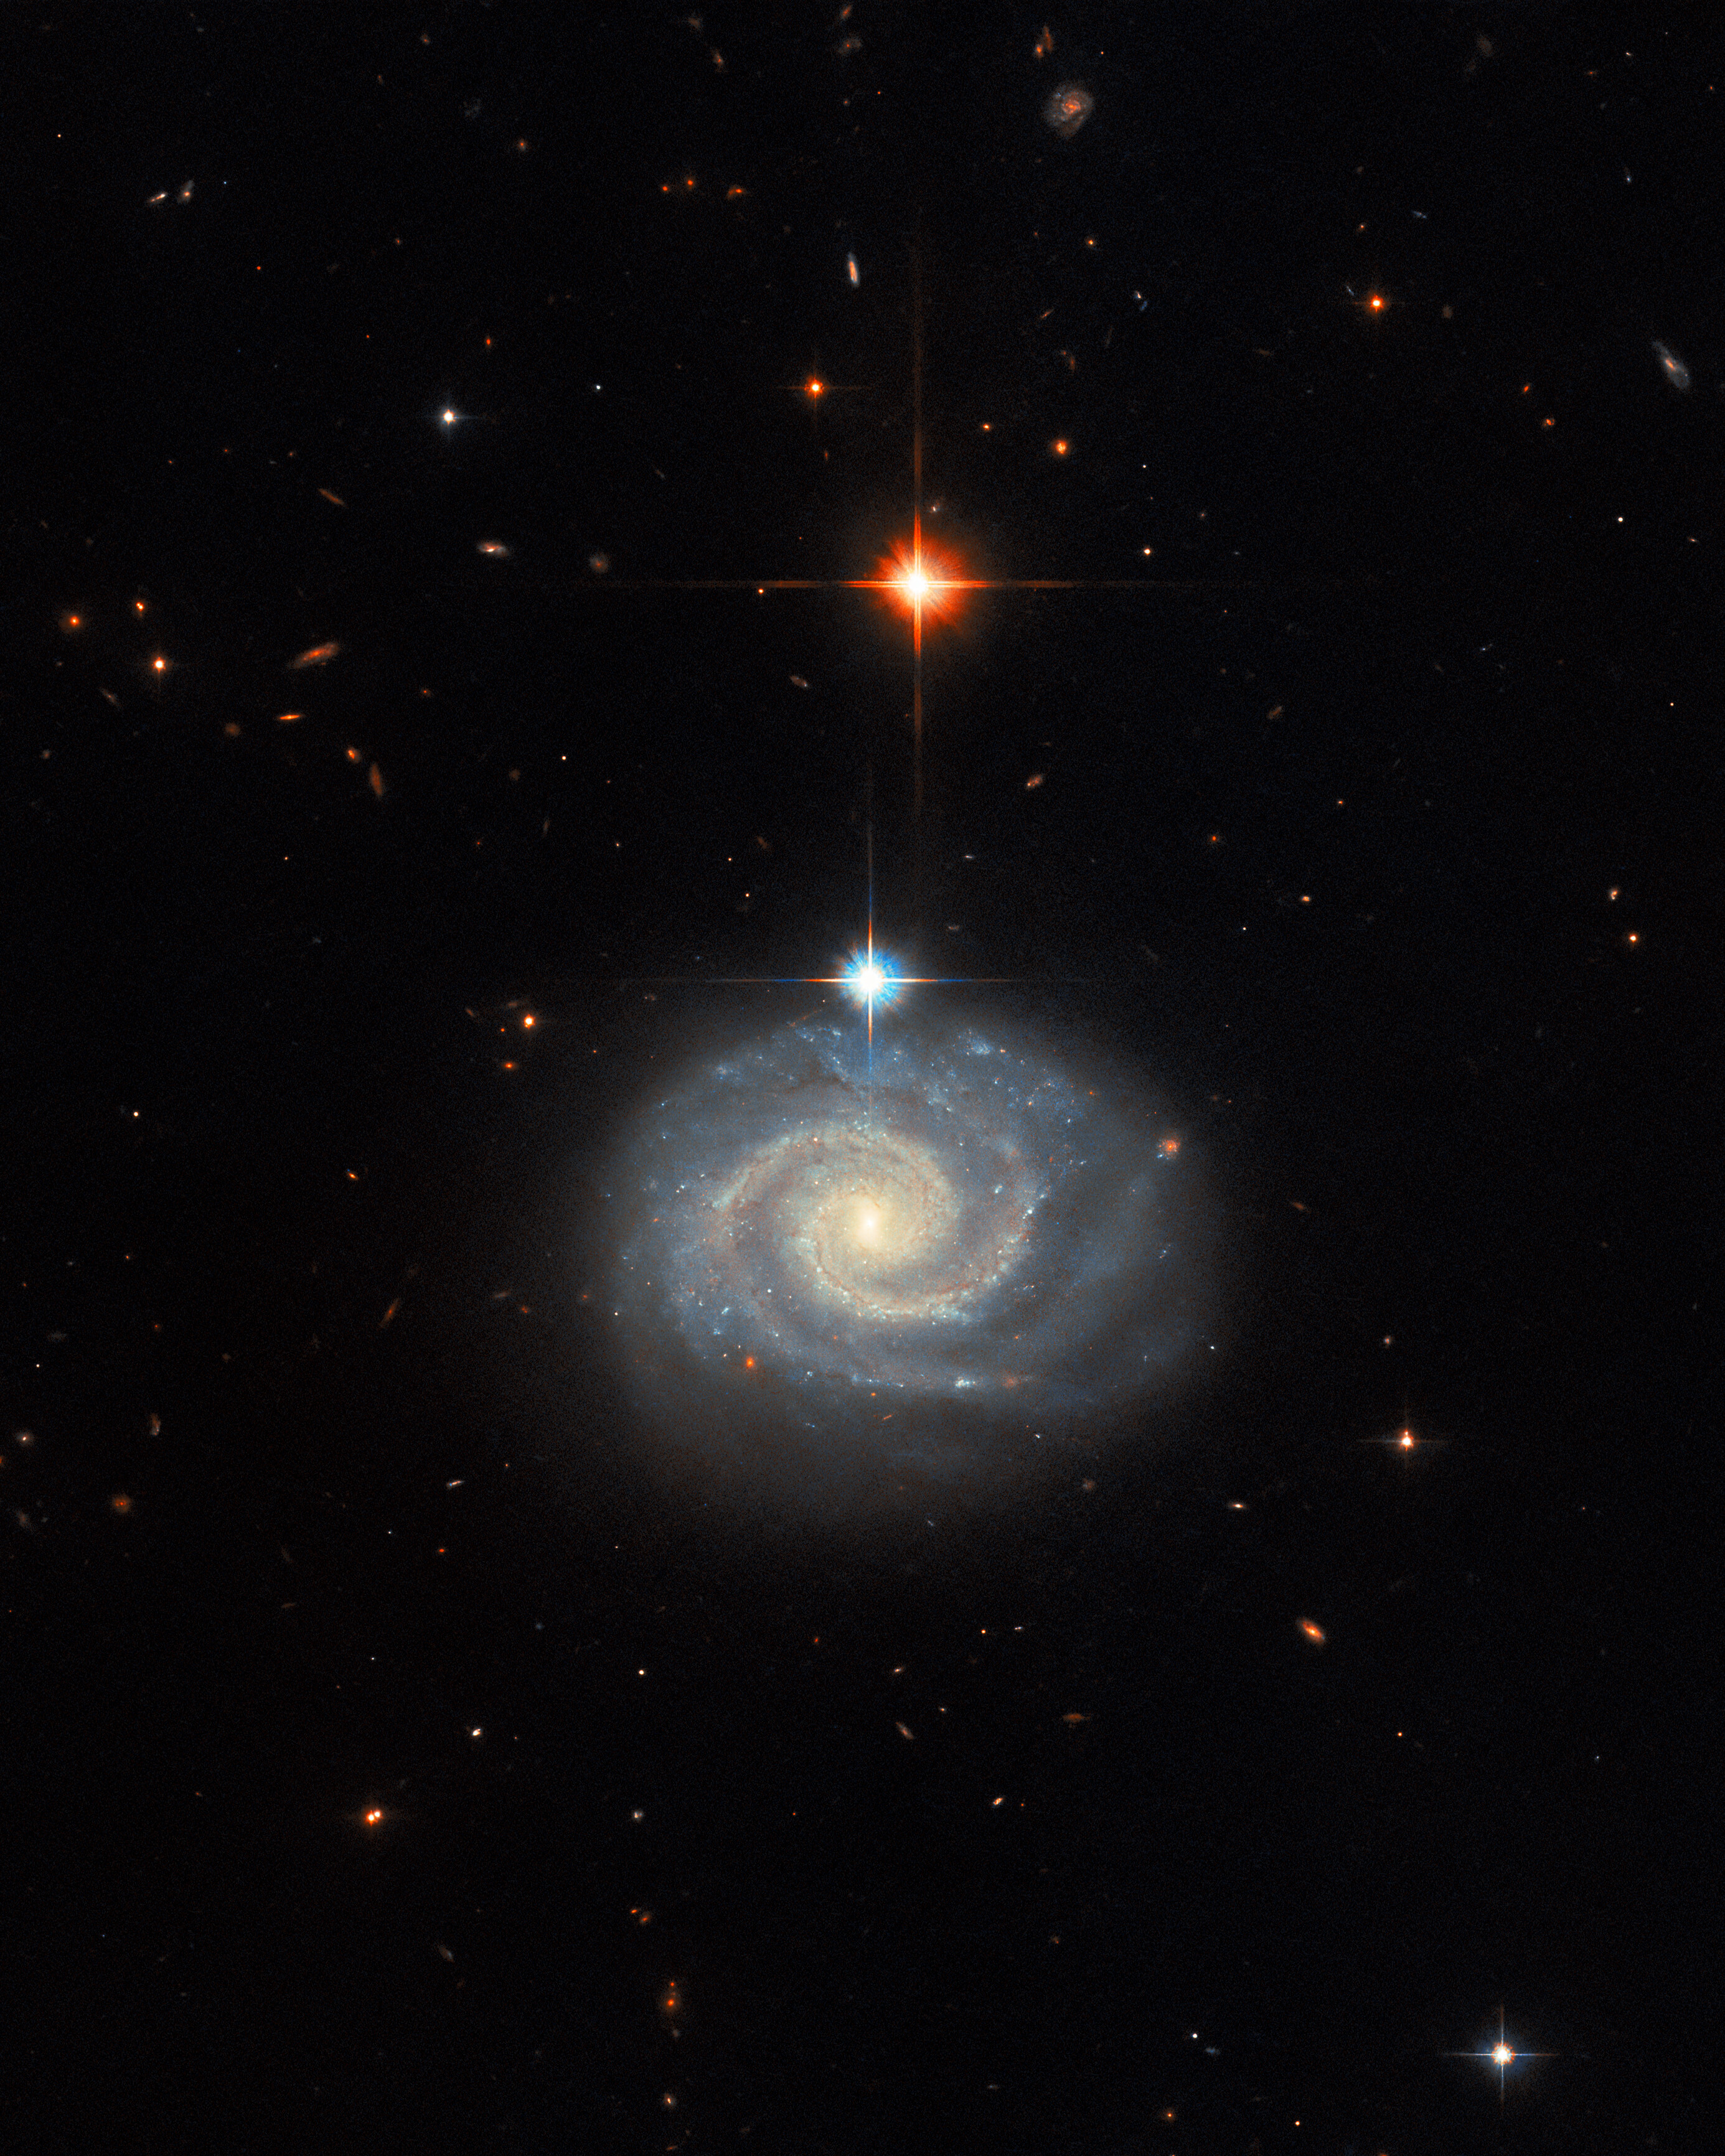 A spiral galaxy. It appears to be almost circular and seen face-on, with two prominent spiral arms winding out from a glowing core. It is centered in the frame as if a portrait. Most of the background is black, with only tiny, distant galaxies, but there are two large bright stars in the foreground, one blue and one red, directly above the galaxy.